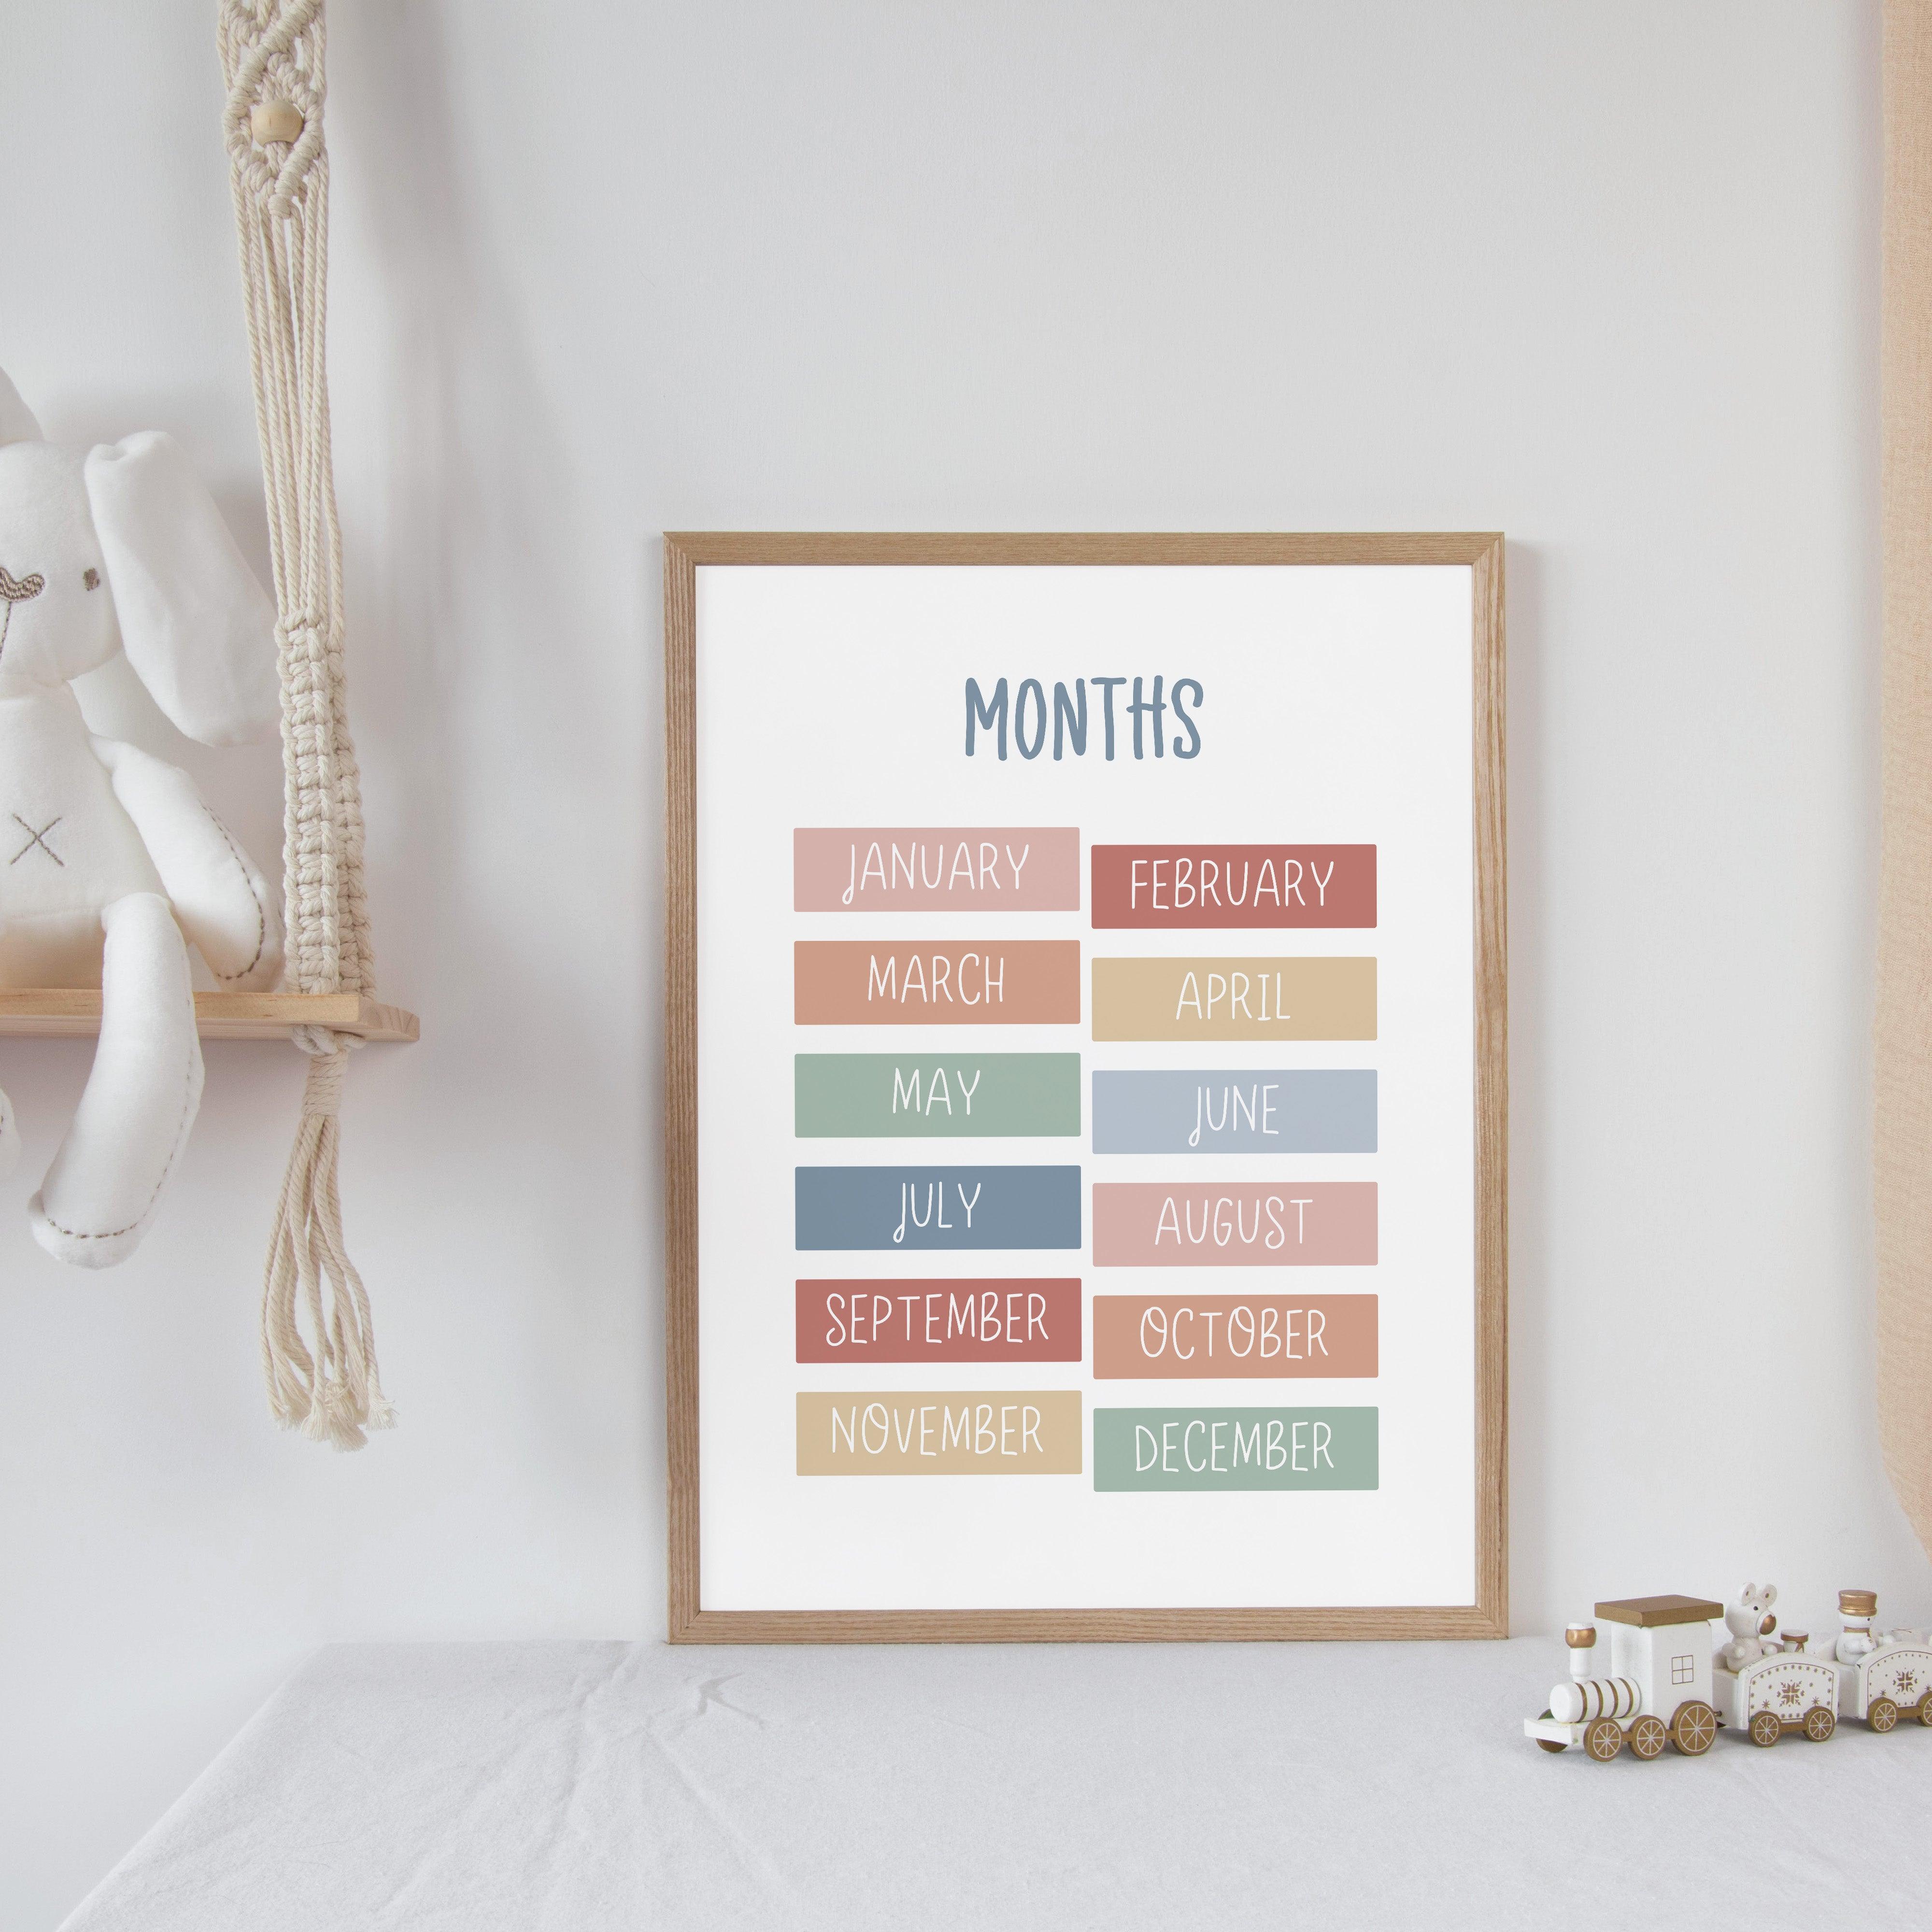 Months - Pastel Tones - Educational Print Series - Poster - The Willow Corner